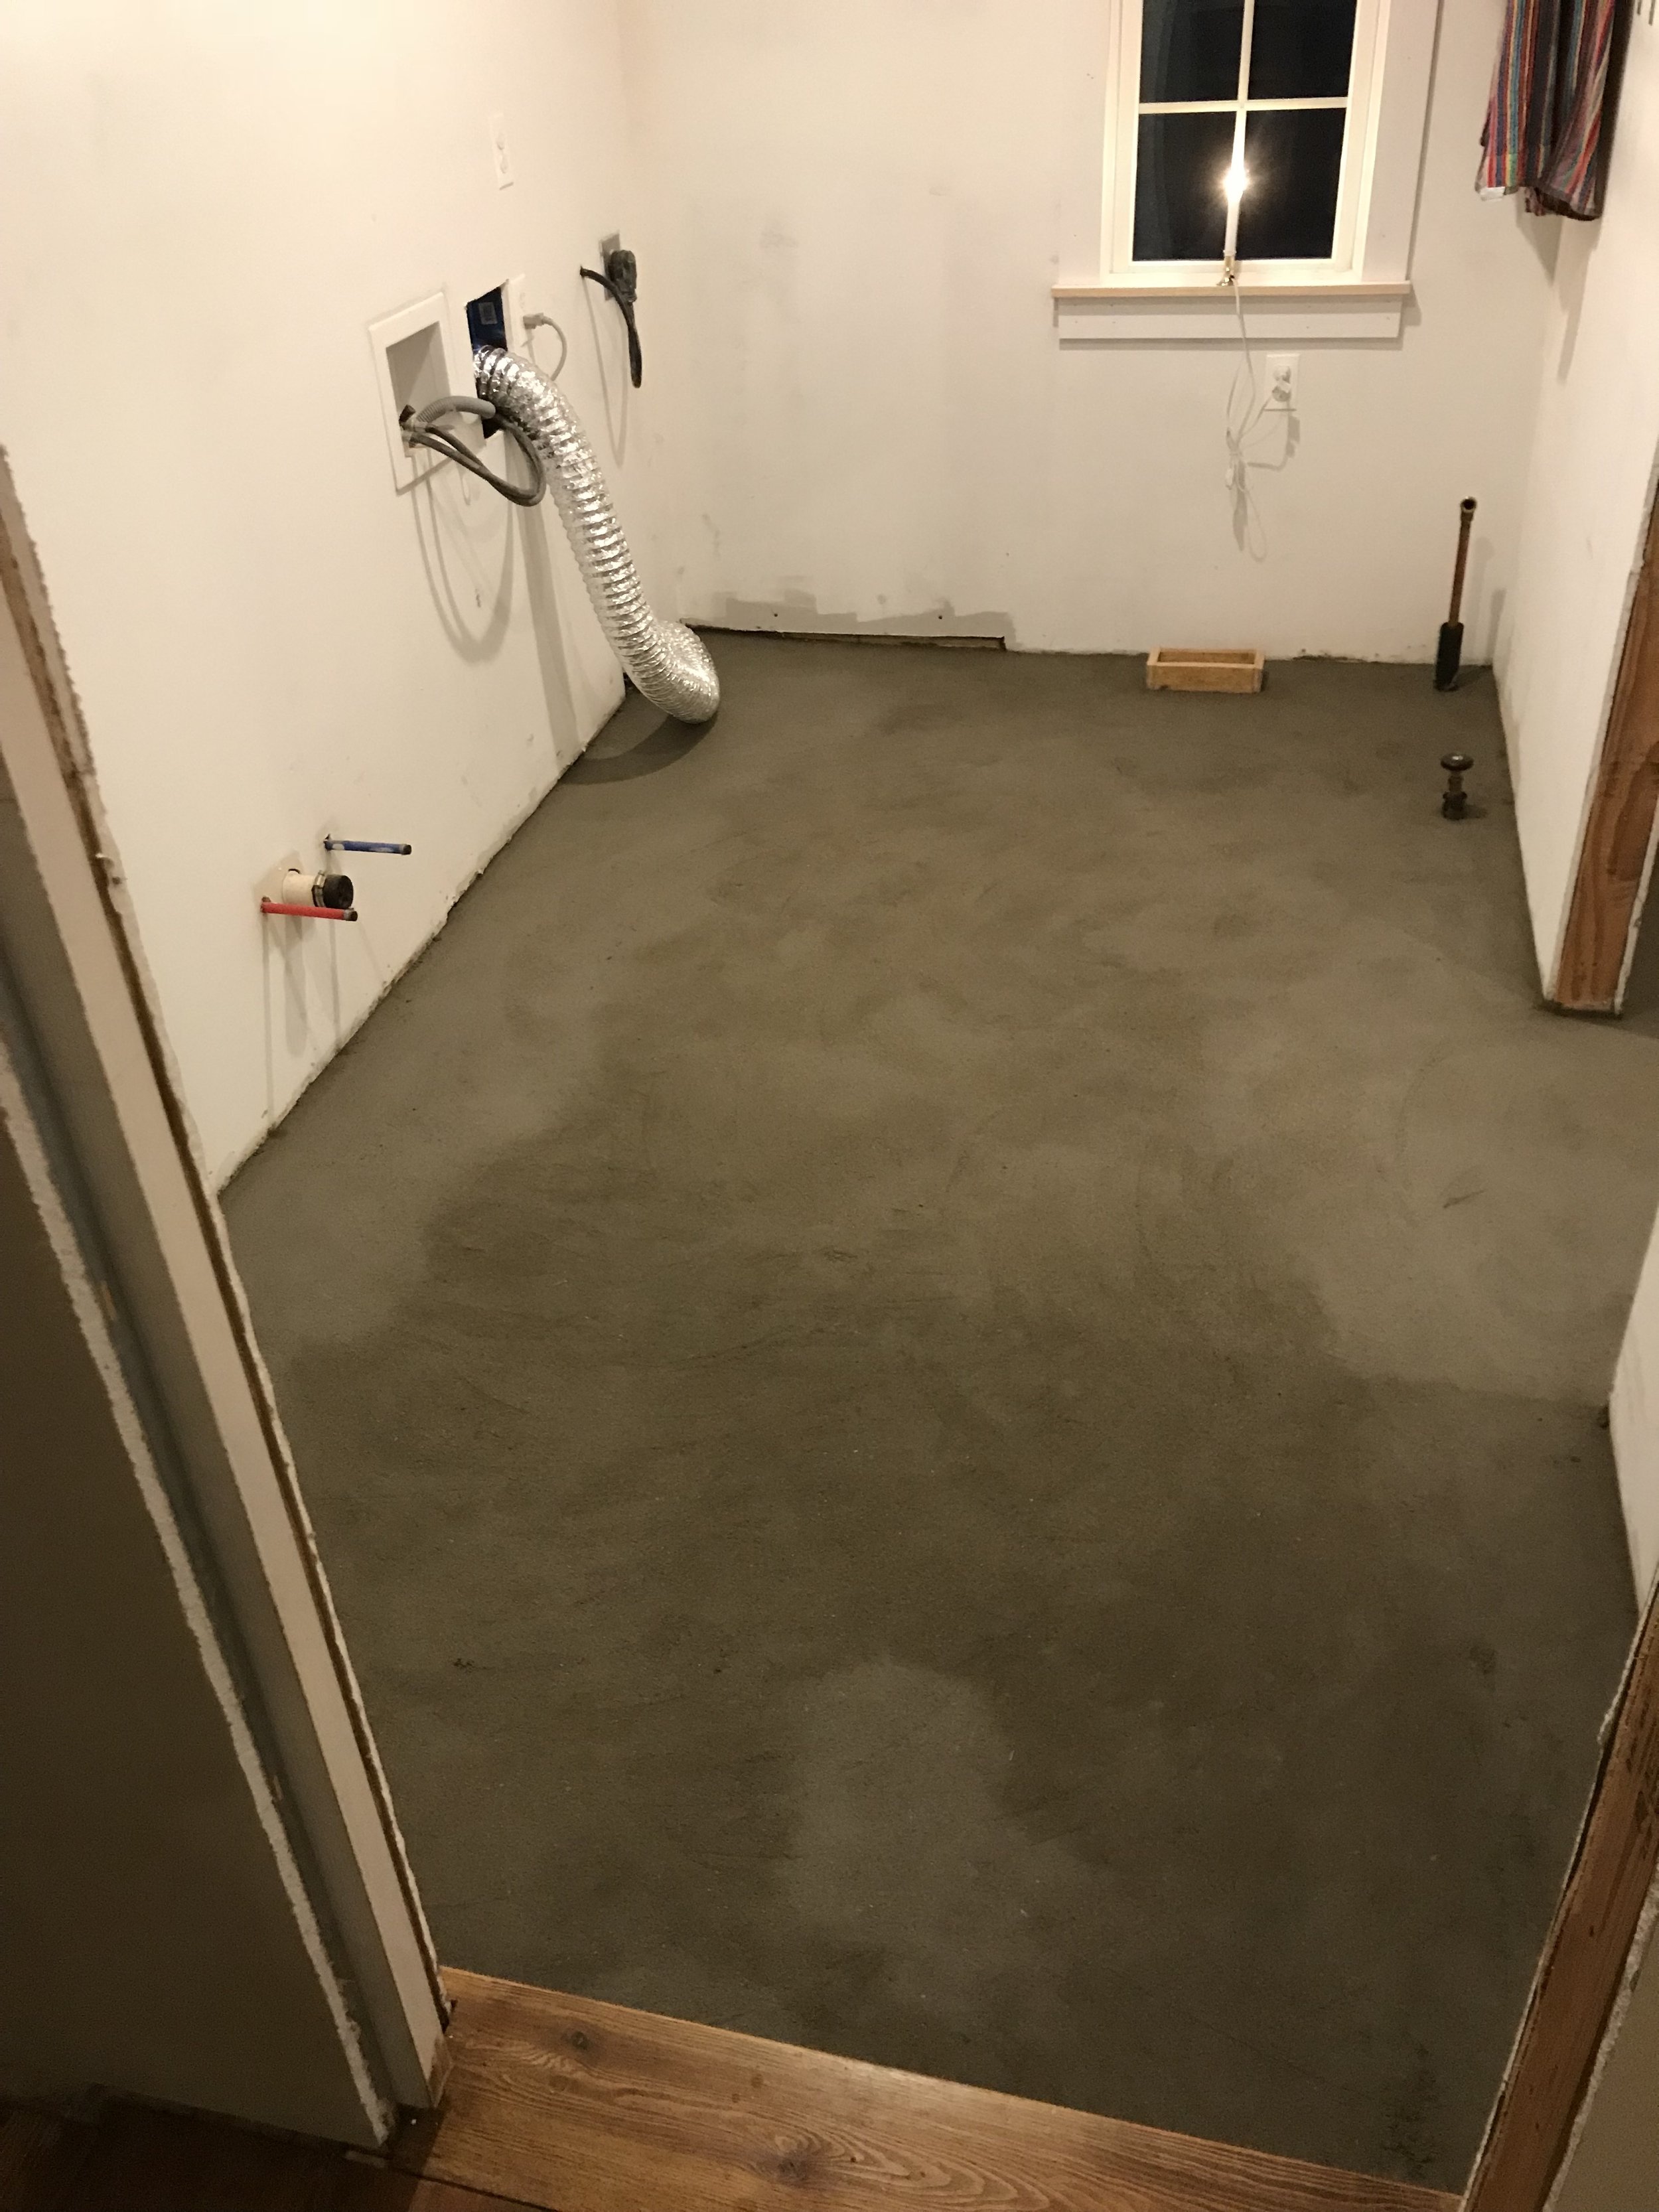  A base layer of mortar, the wet bed, is installed over the wire mesh, and the whole thing is pitched towards a drain in the neighboring mudroom. This is to drain water out quickly if the washing machine ever springs a leak.  